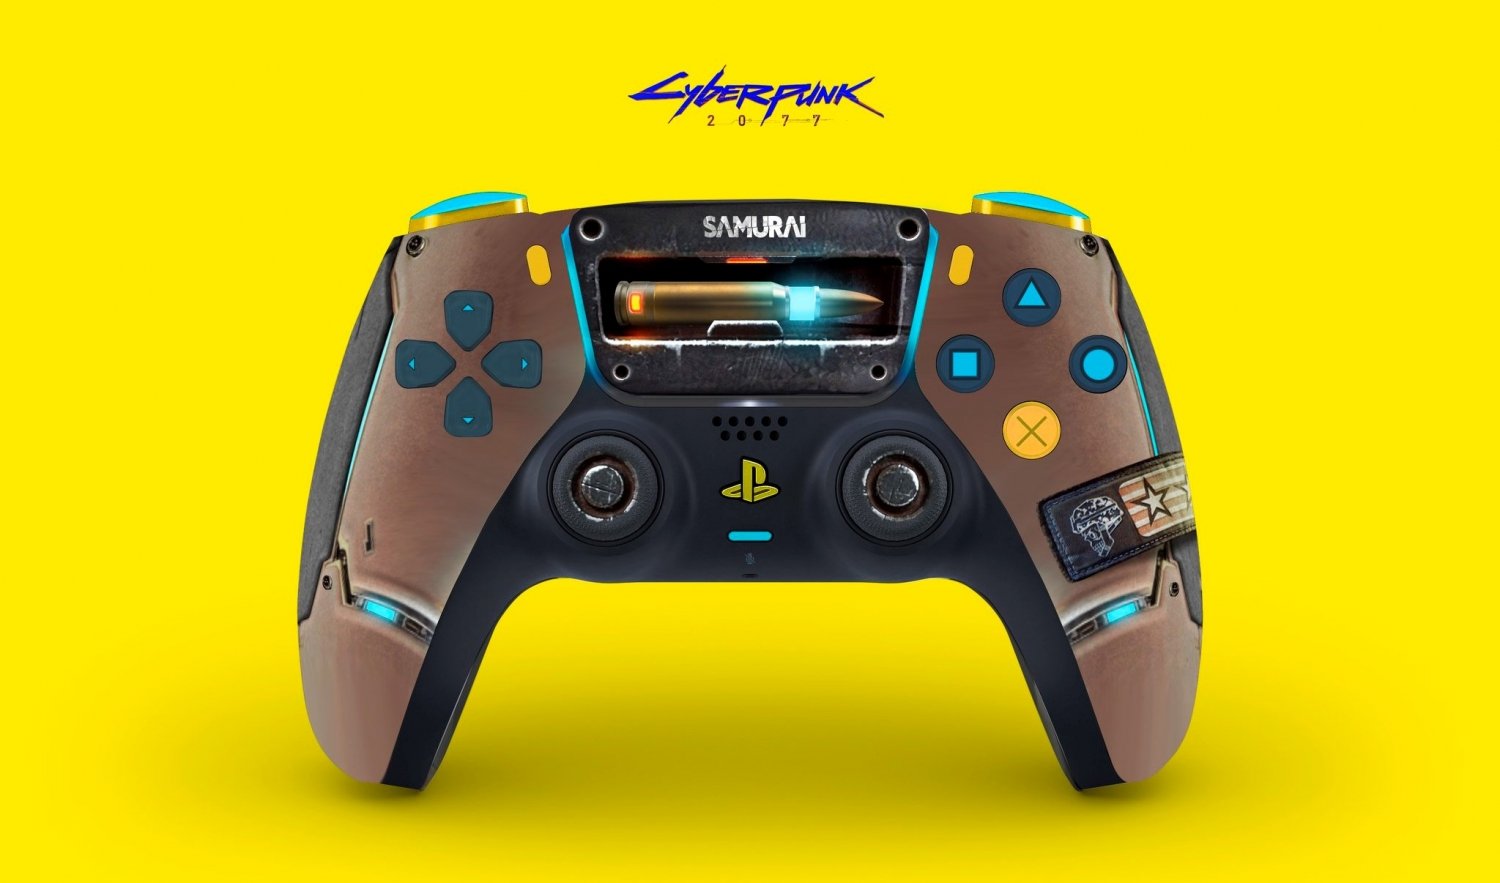 https://static.tweaktown.com/news/7/1/71825_08_check-out-this-cyberpunk-2077-themed-playstation-5-controller_full.jpg